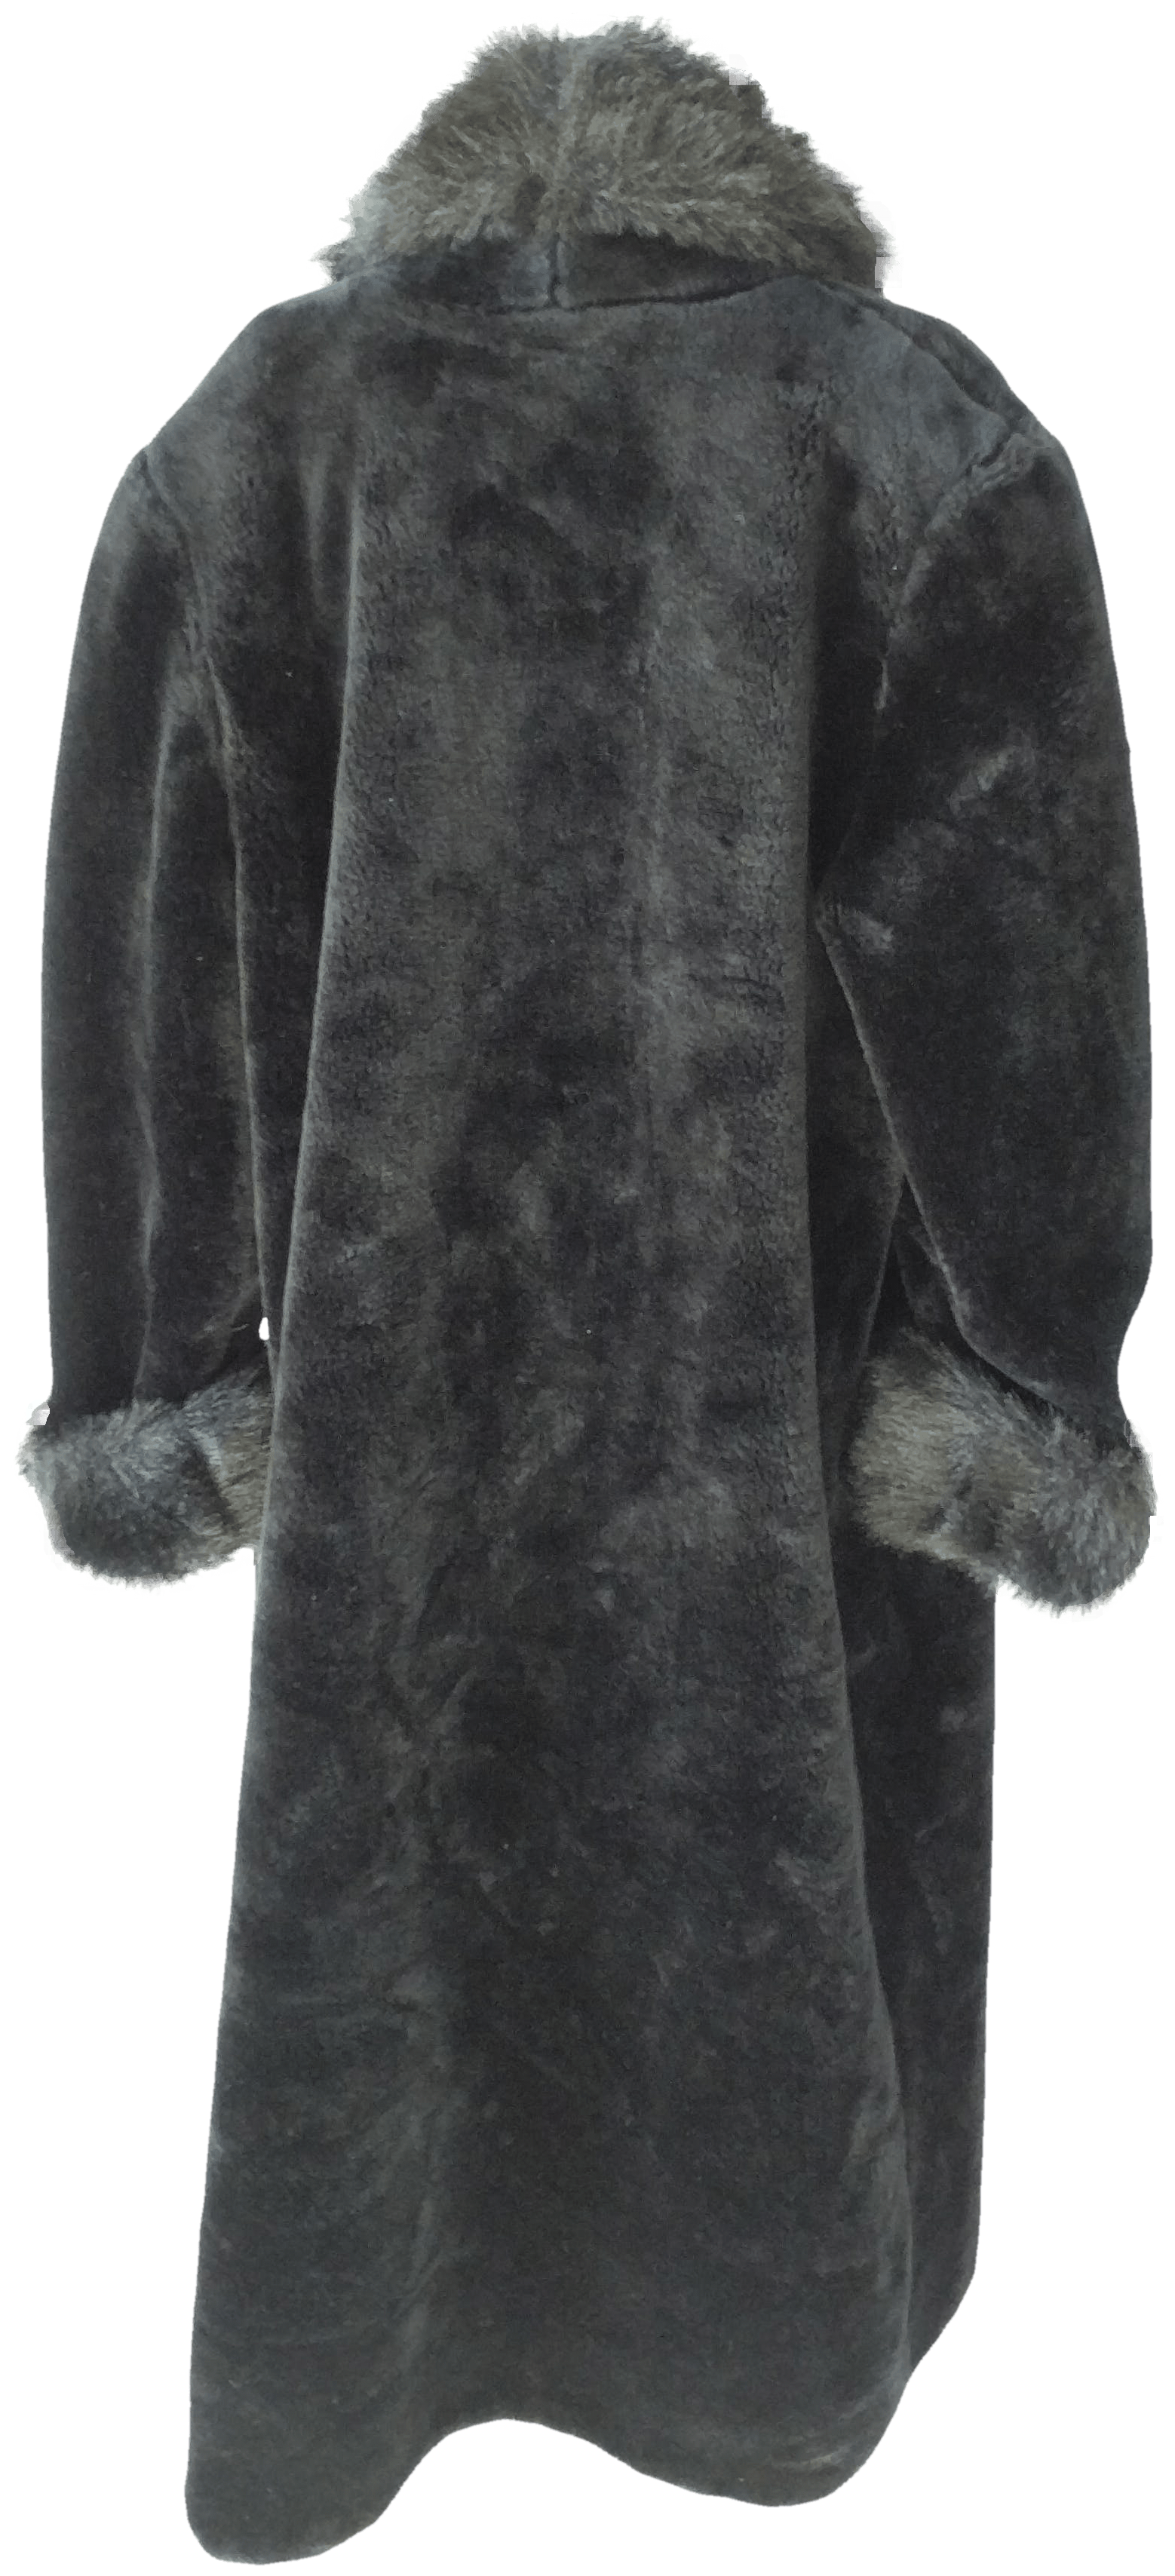 Full Length Faux Fur Coat By Dona Lucci Thrilling